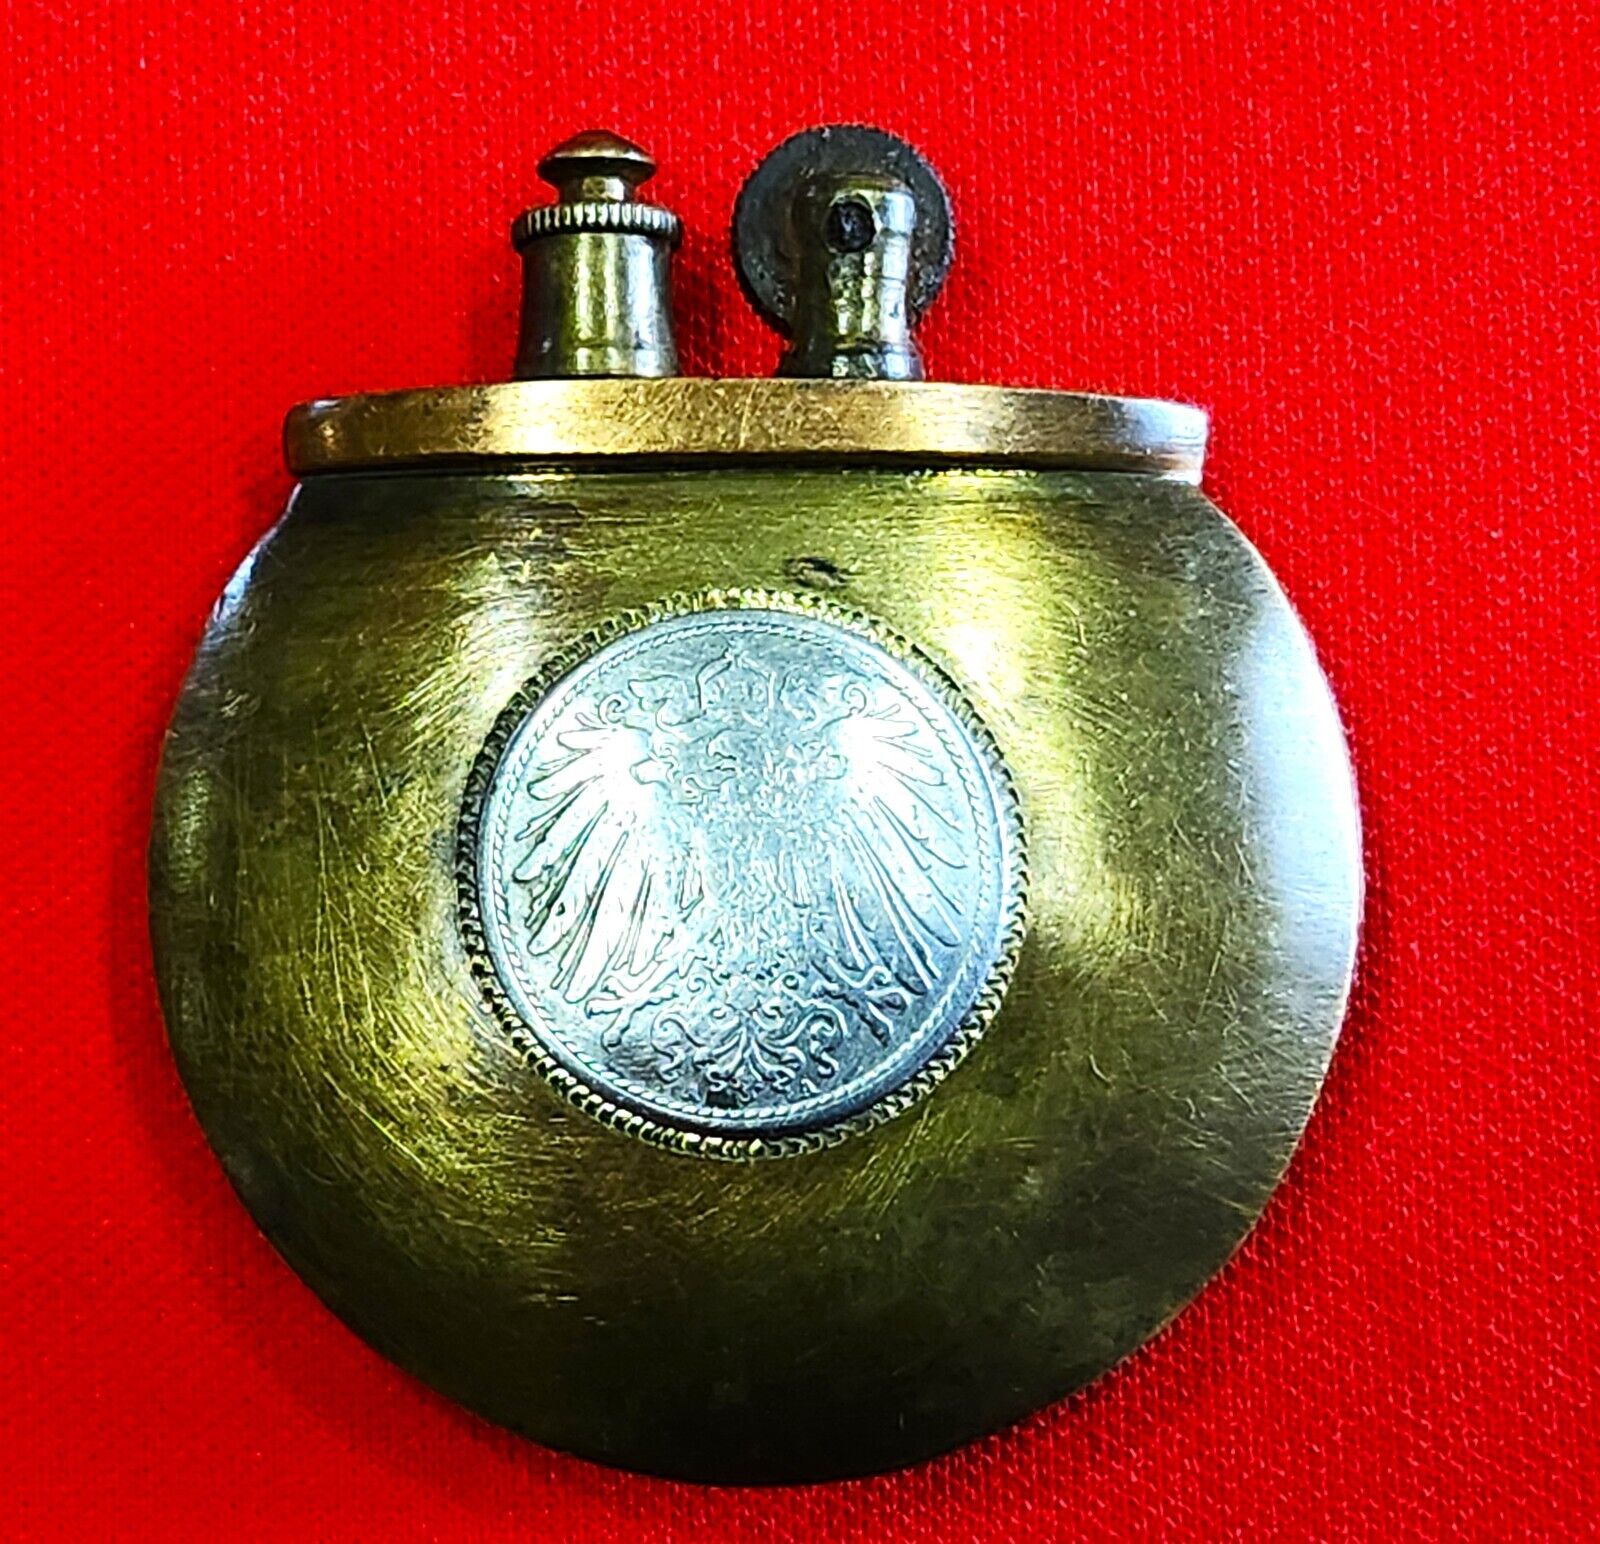 NICE UNIQUE WWI ERA EUROPEAN TRENCH ART LIGHTER WITH A GERMAN 1 MARK SILVER COIN